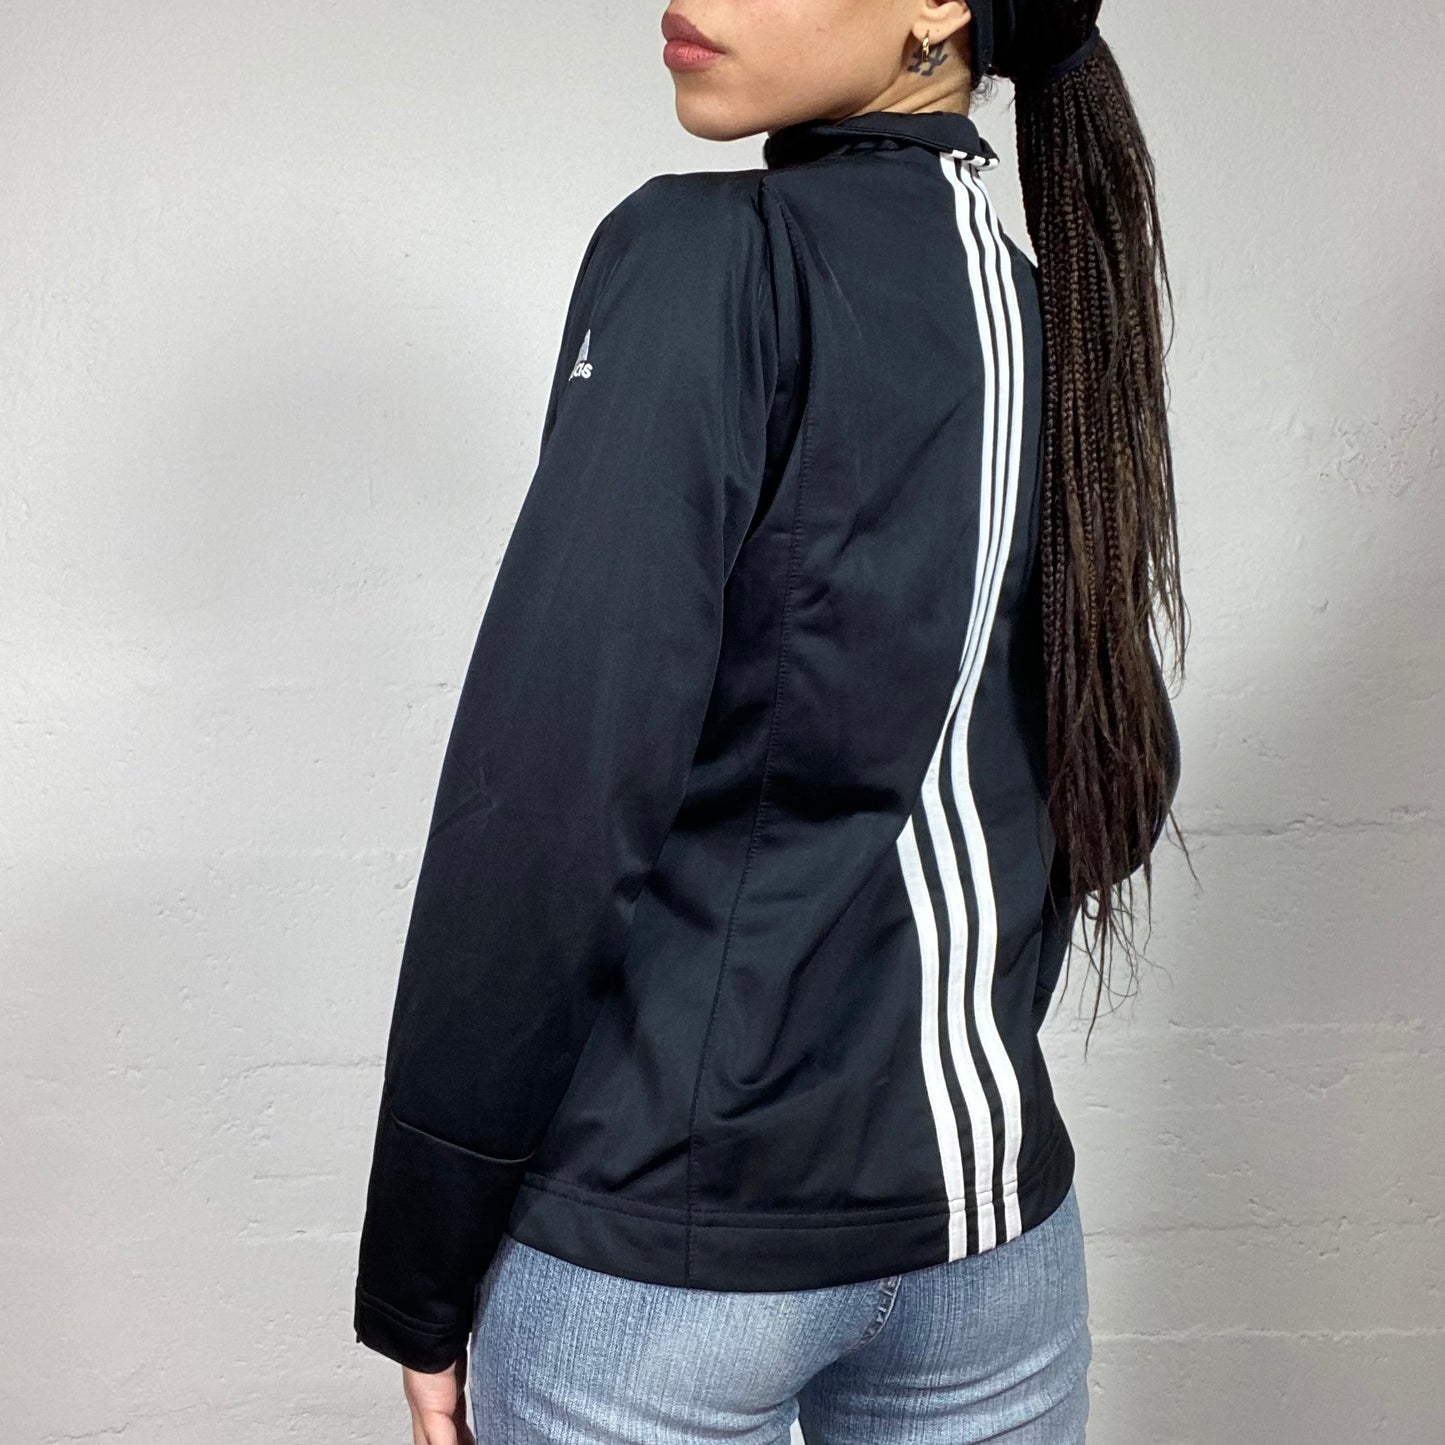 Vintage 90's Adidas Sporty Girl Black Zip Up Jacket with White Central Triple Brand Trim Detail (M)